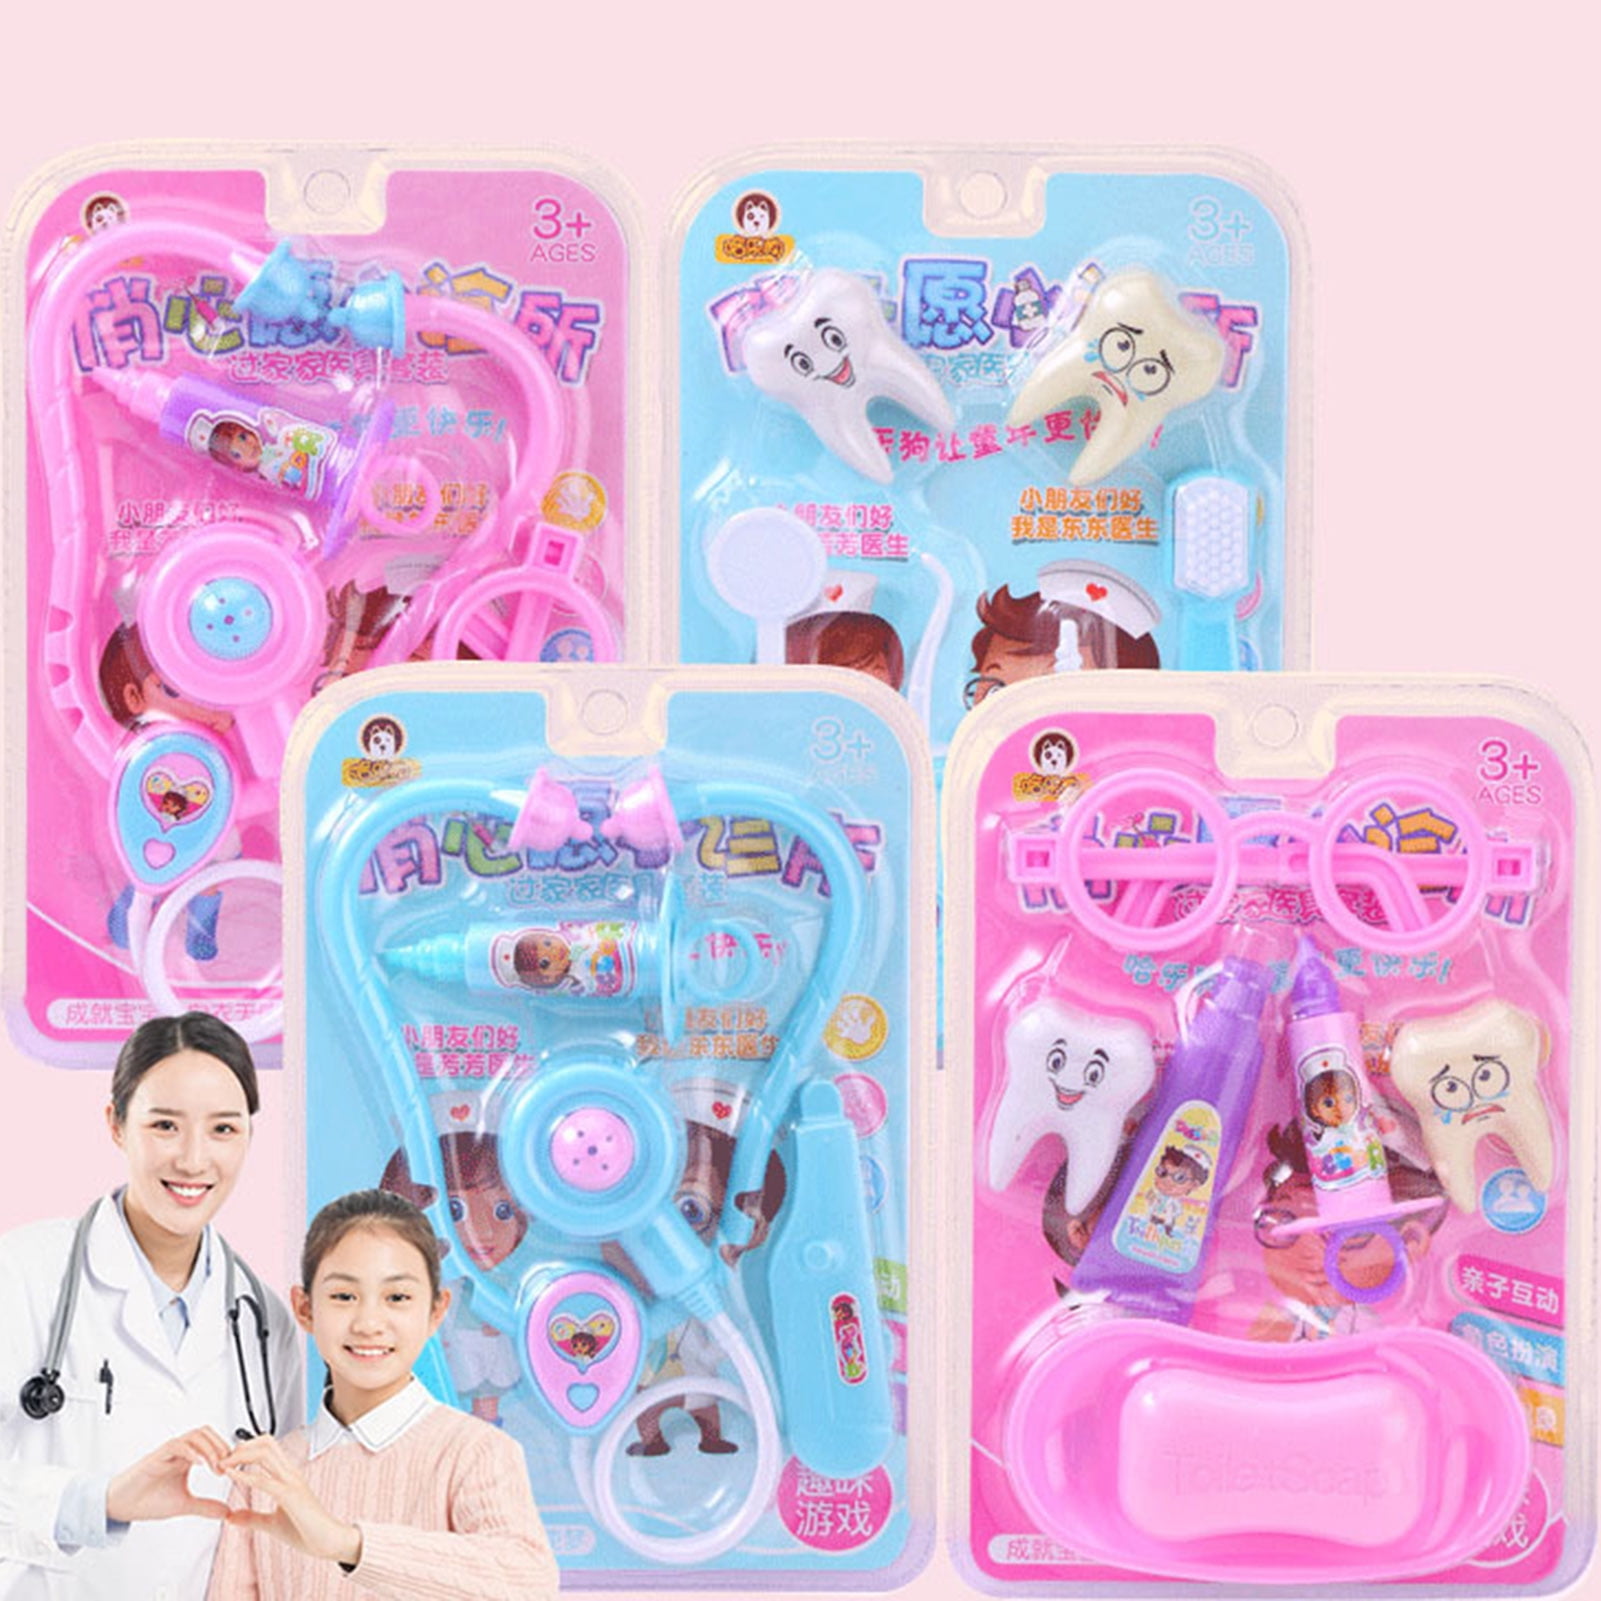 MyBeauty 1 Set Medical Toys Kit Simulation Role Play Colorful Doctor Nurse  Toy Children Gift for Cosplay